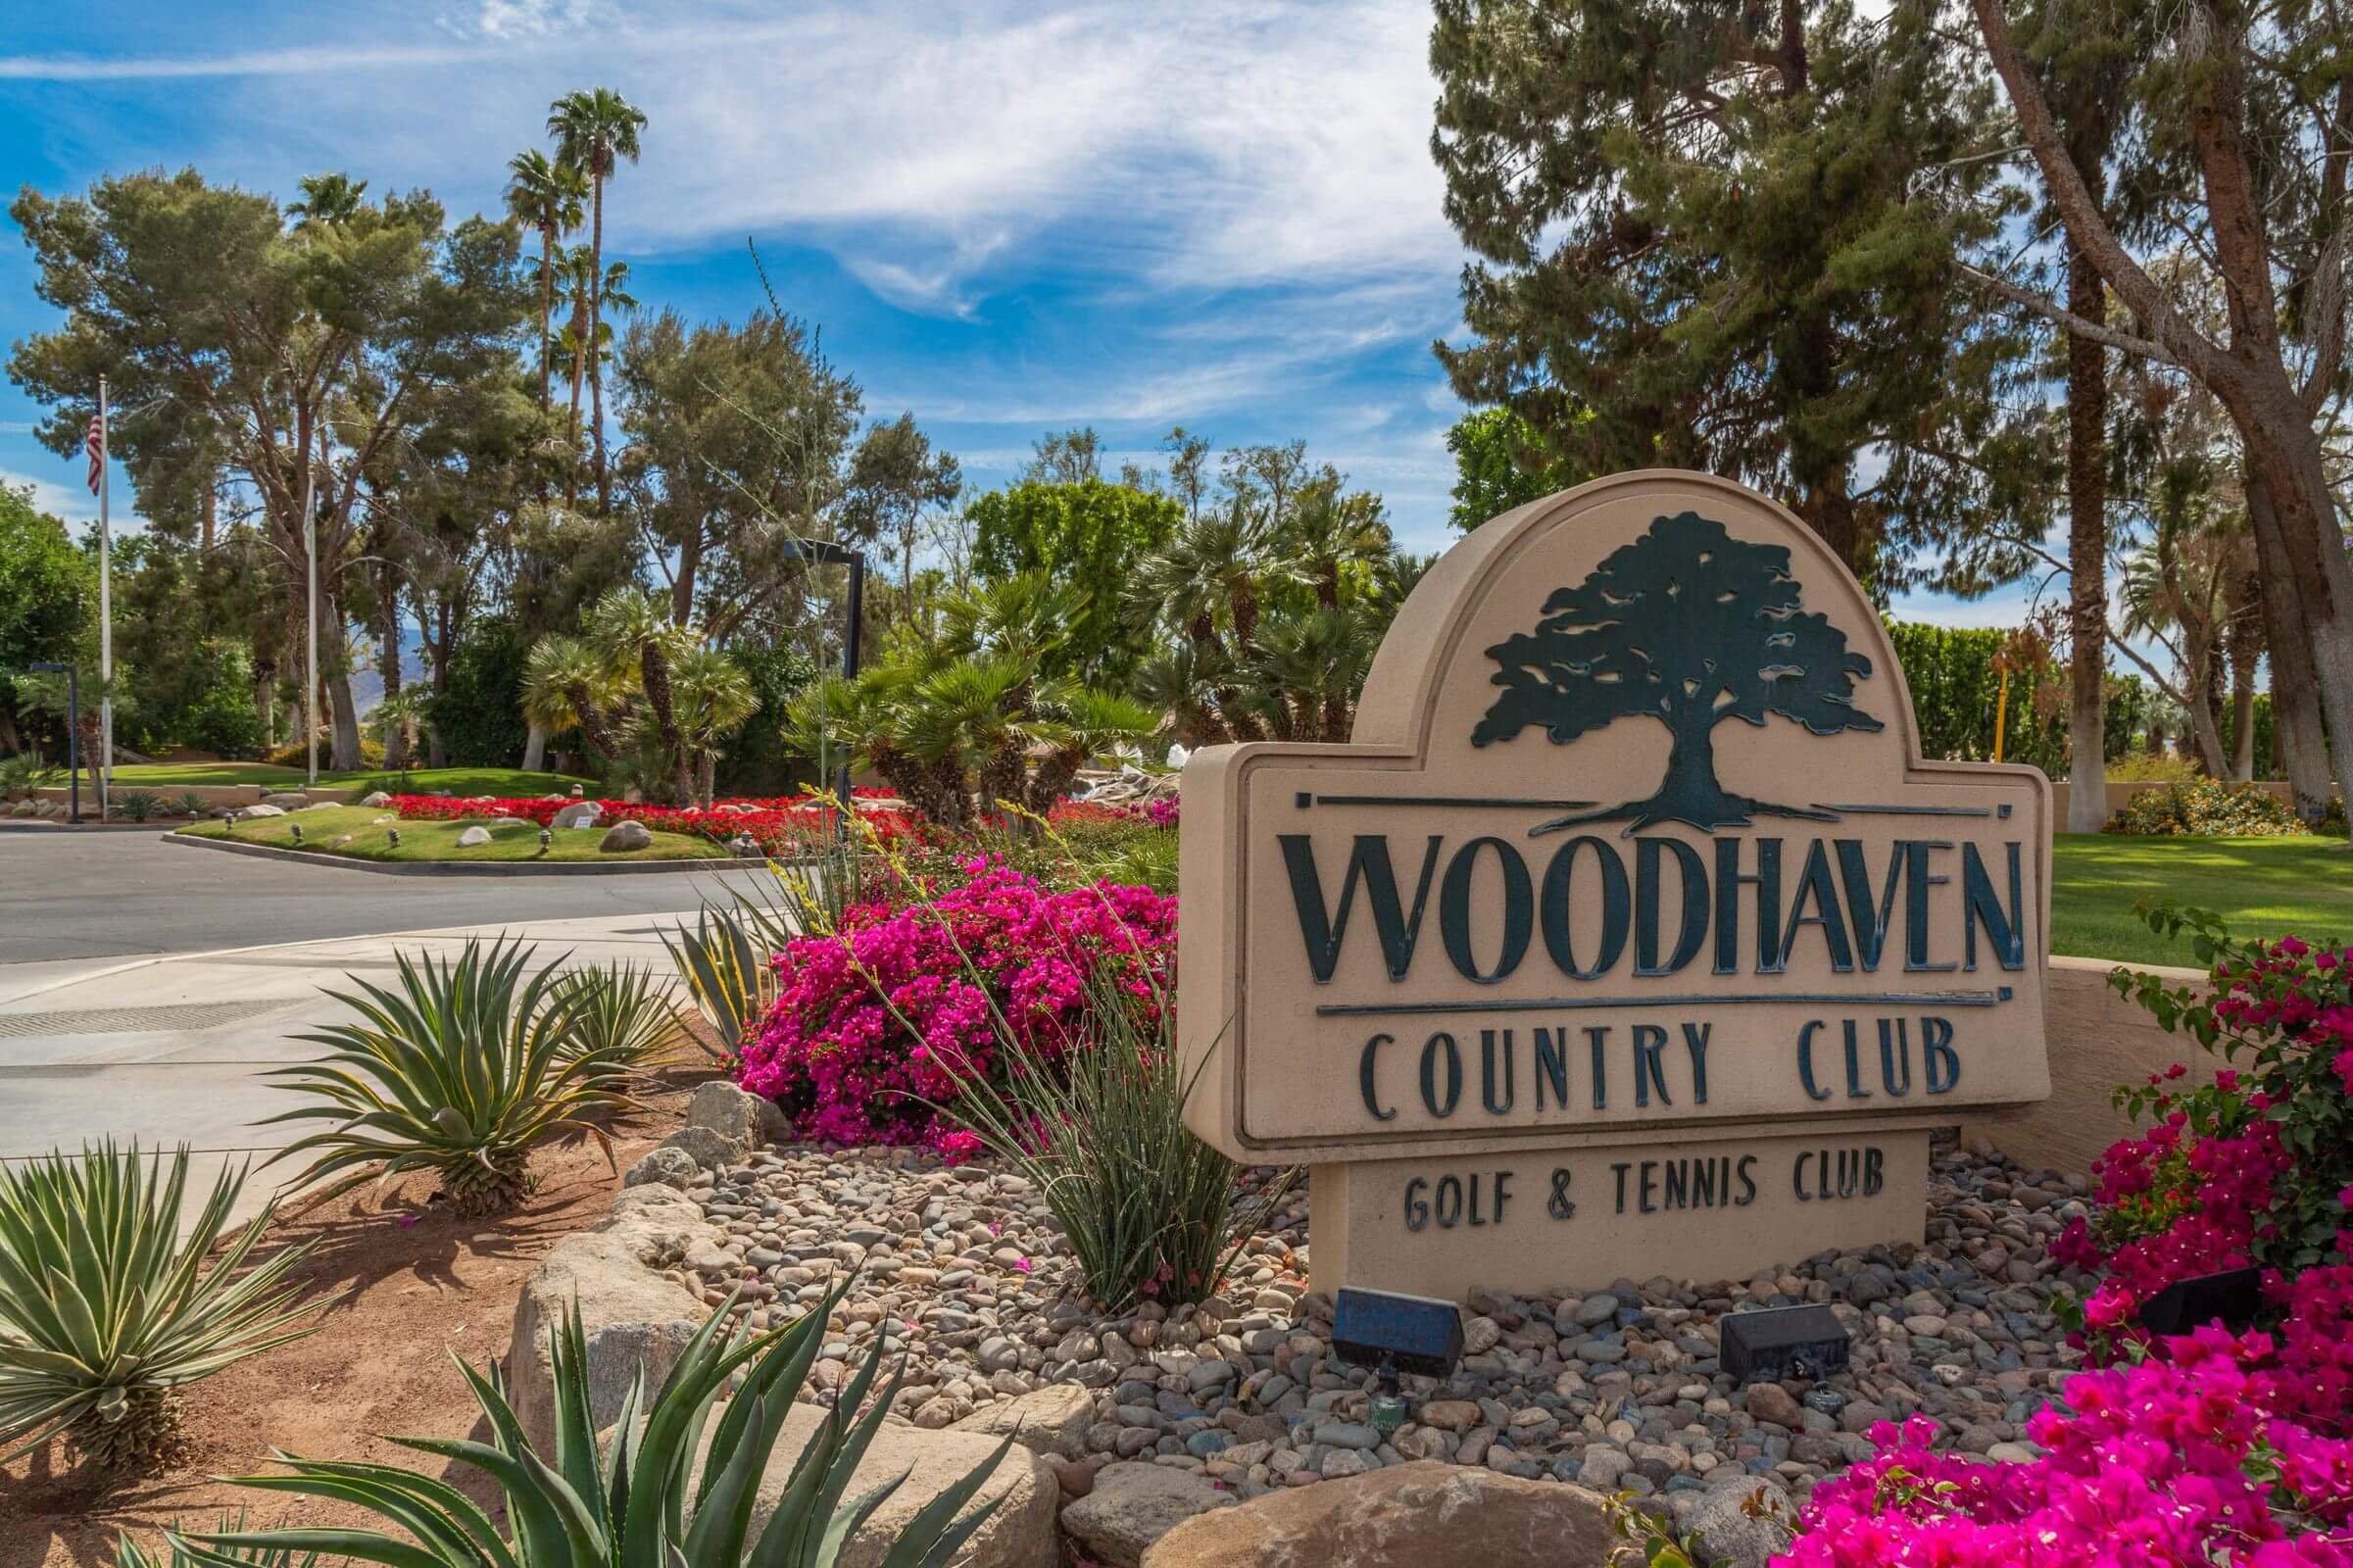 Woodhaven Country Club Palm Desert 92211